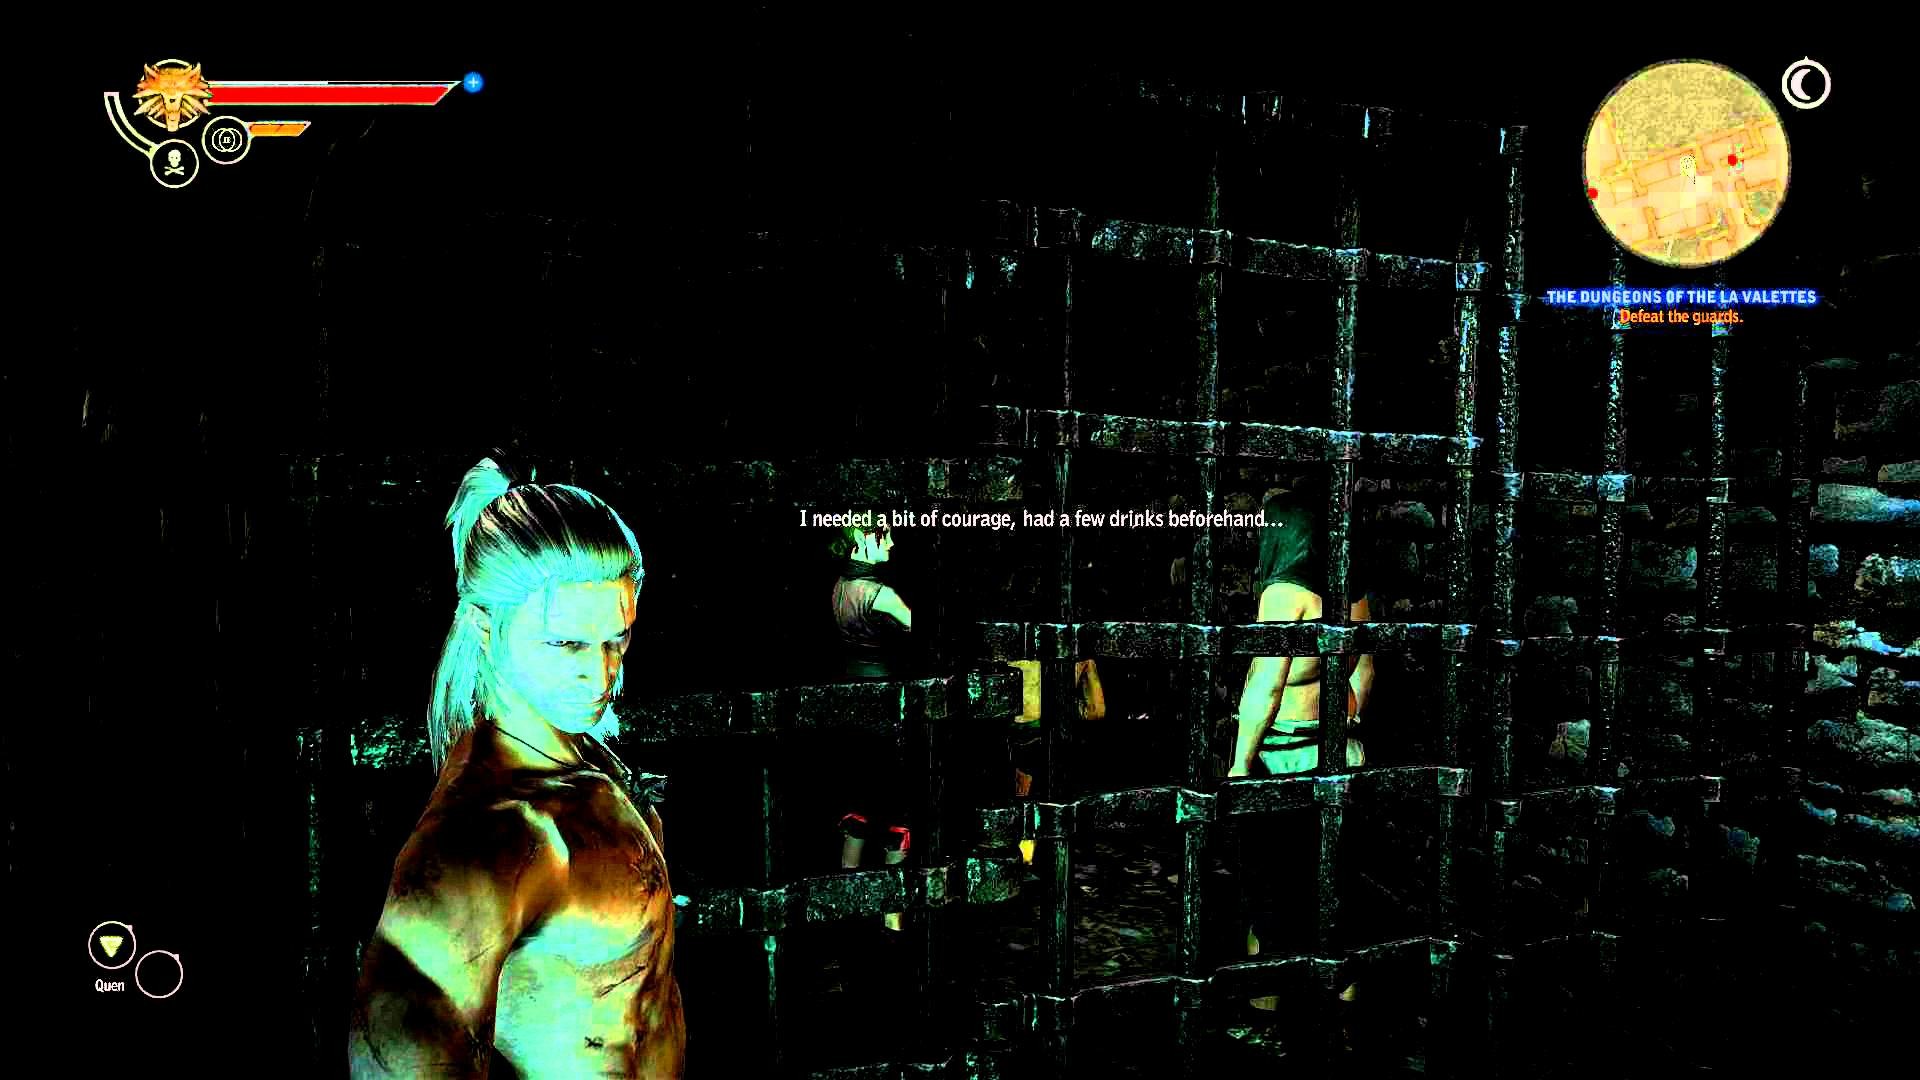 1920x1080 2011-05-29 PC Witcher 2: Prison Break Easter Egg (Michael Scofield Tattoo  Reference)